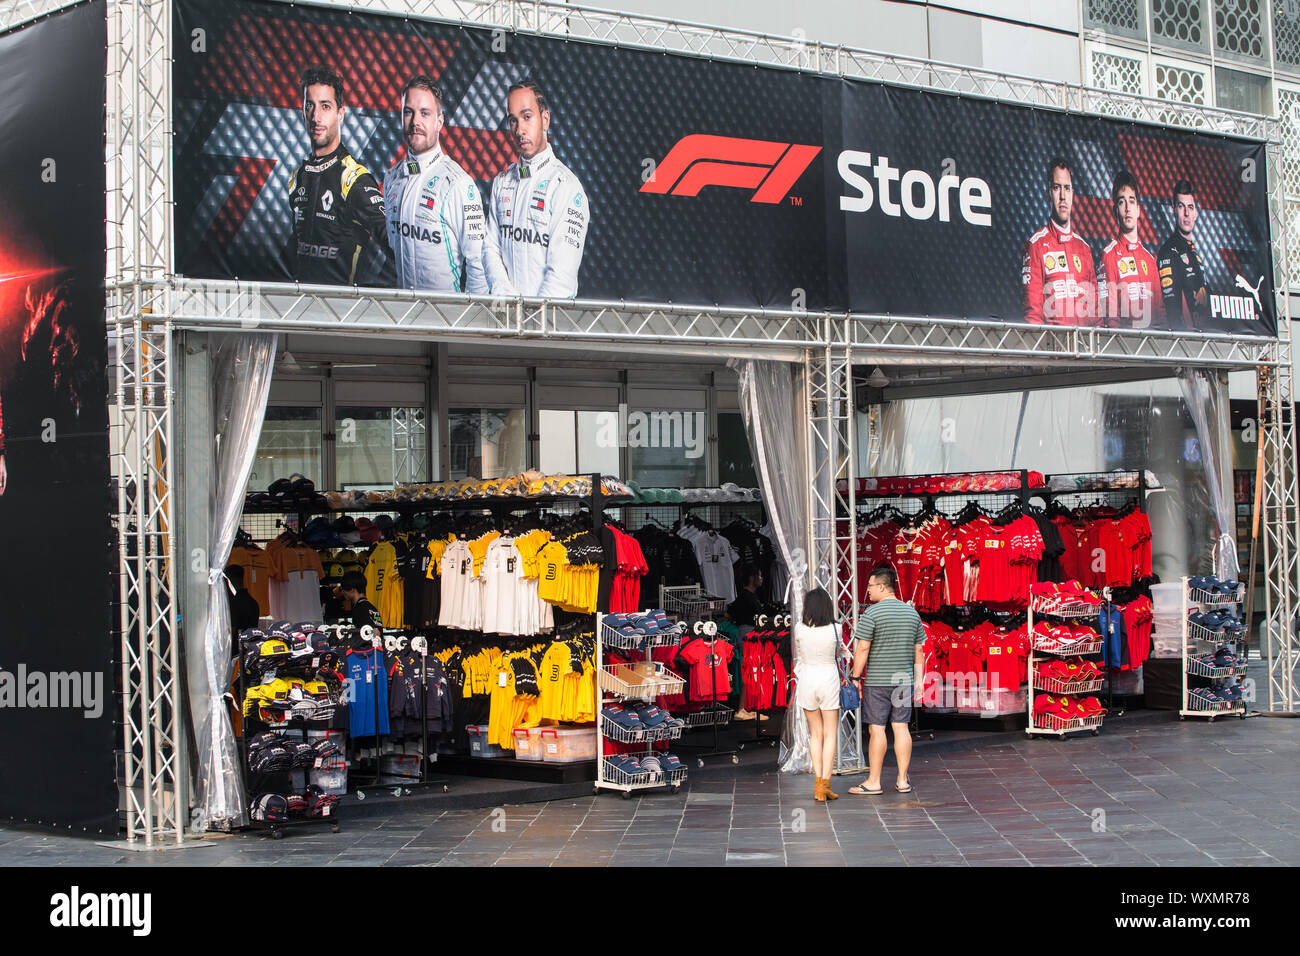 Formula merchandise and images - Alamy